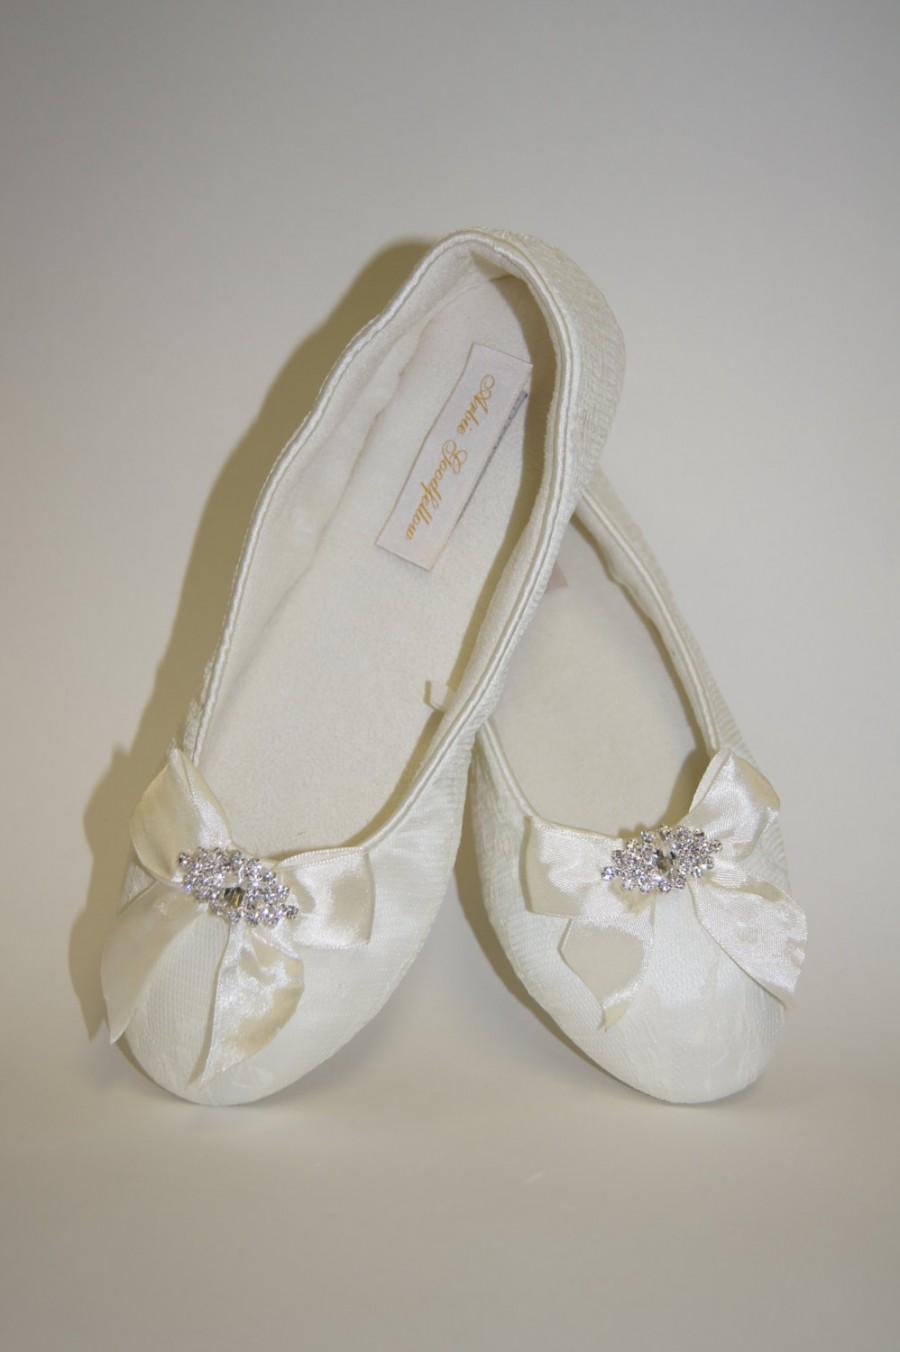 Wedding - Flat Lace Wedding Shoes - Choose From White Or Ivory Lace Flat Shoes - Ribbons And Crystals - Comfortable Flat Lace Wedding Shoes - Parisxox